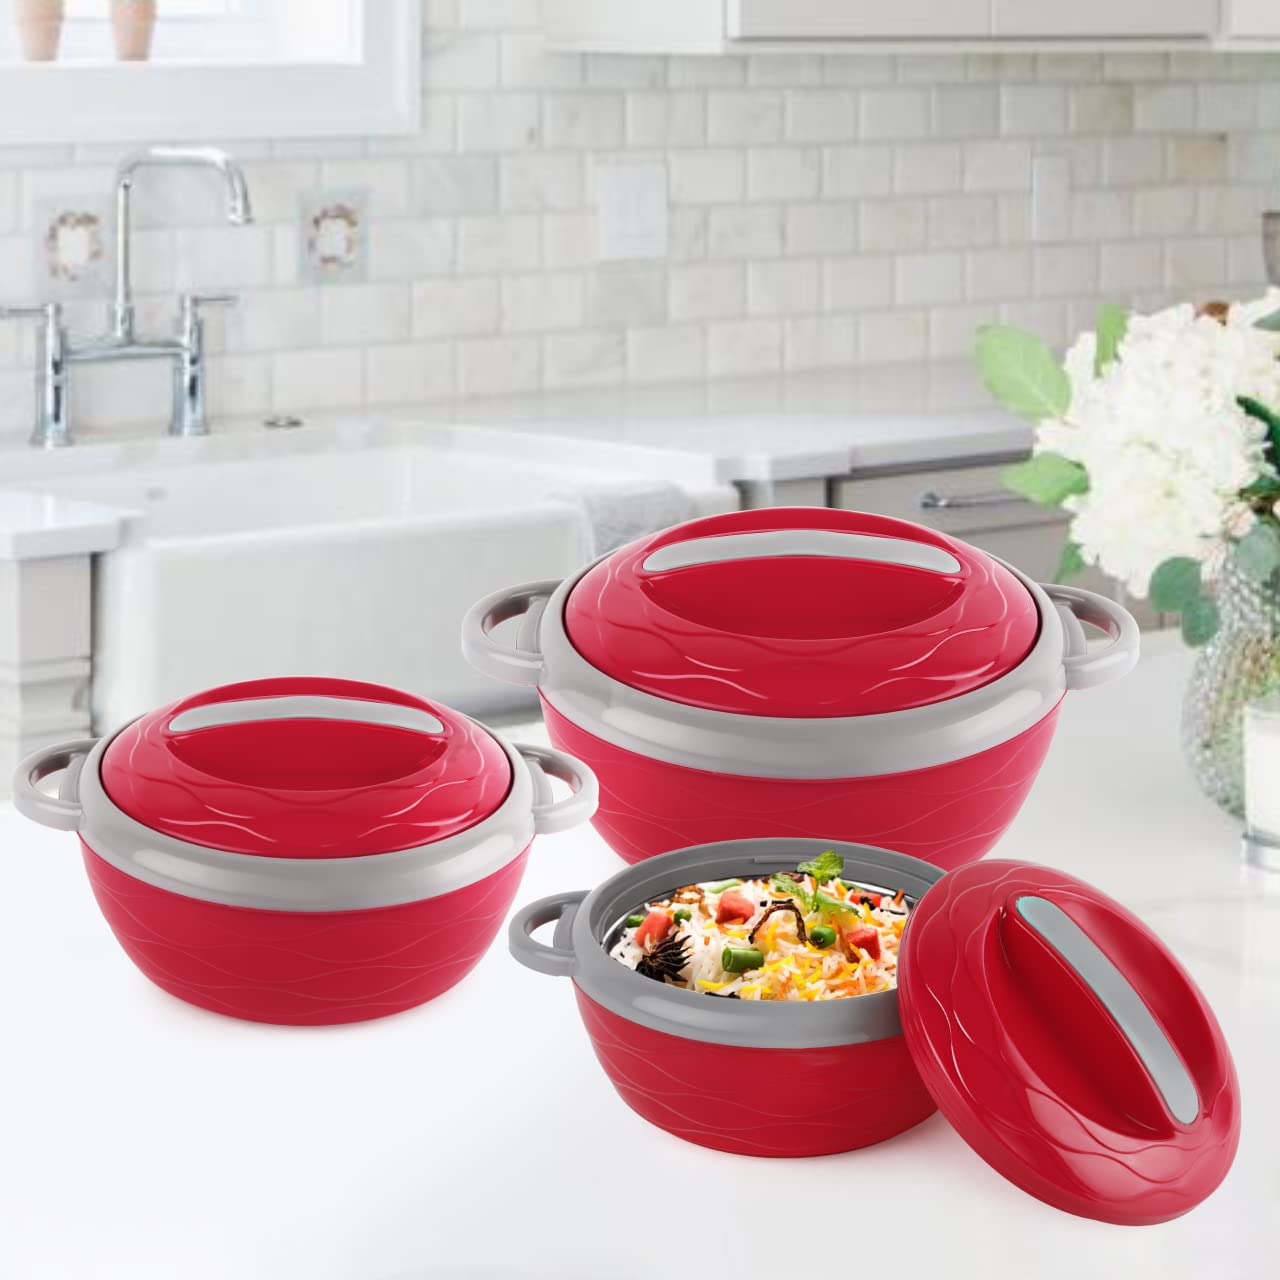 Cello Stainless Steel Hot n Fresh Casserole Set with Inner Steel, Set of 3 (500ml, 1000ml, 1500ml), Red